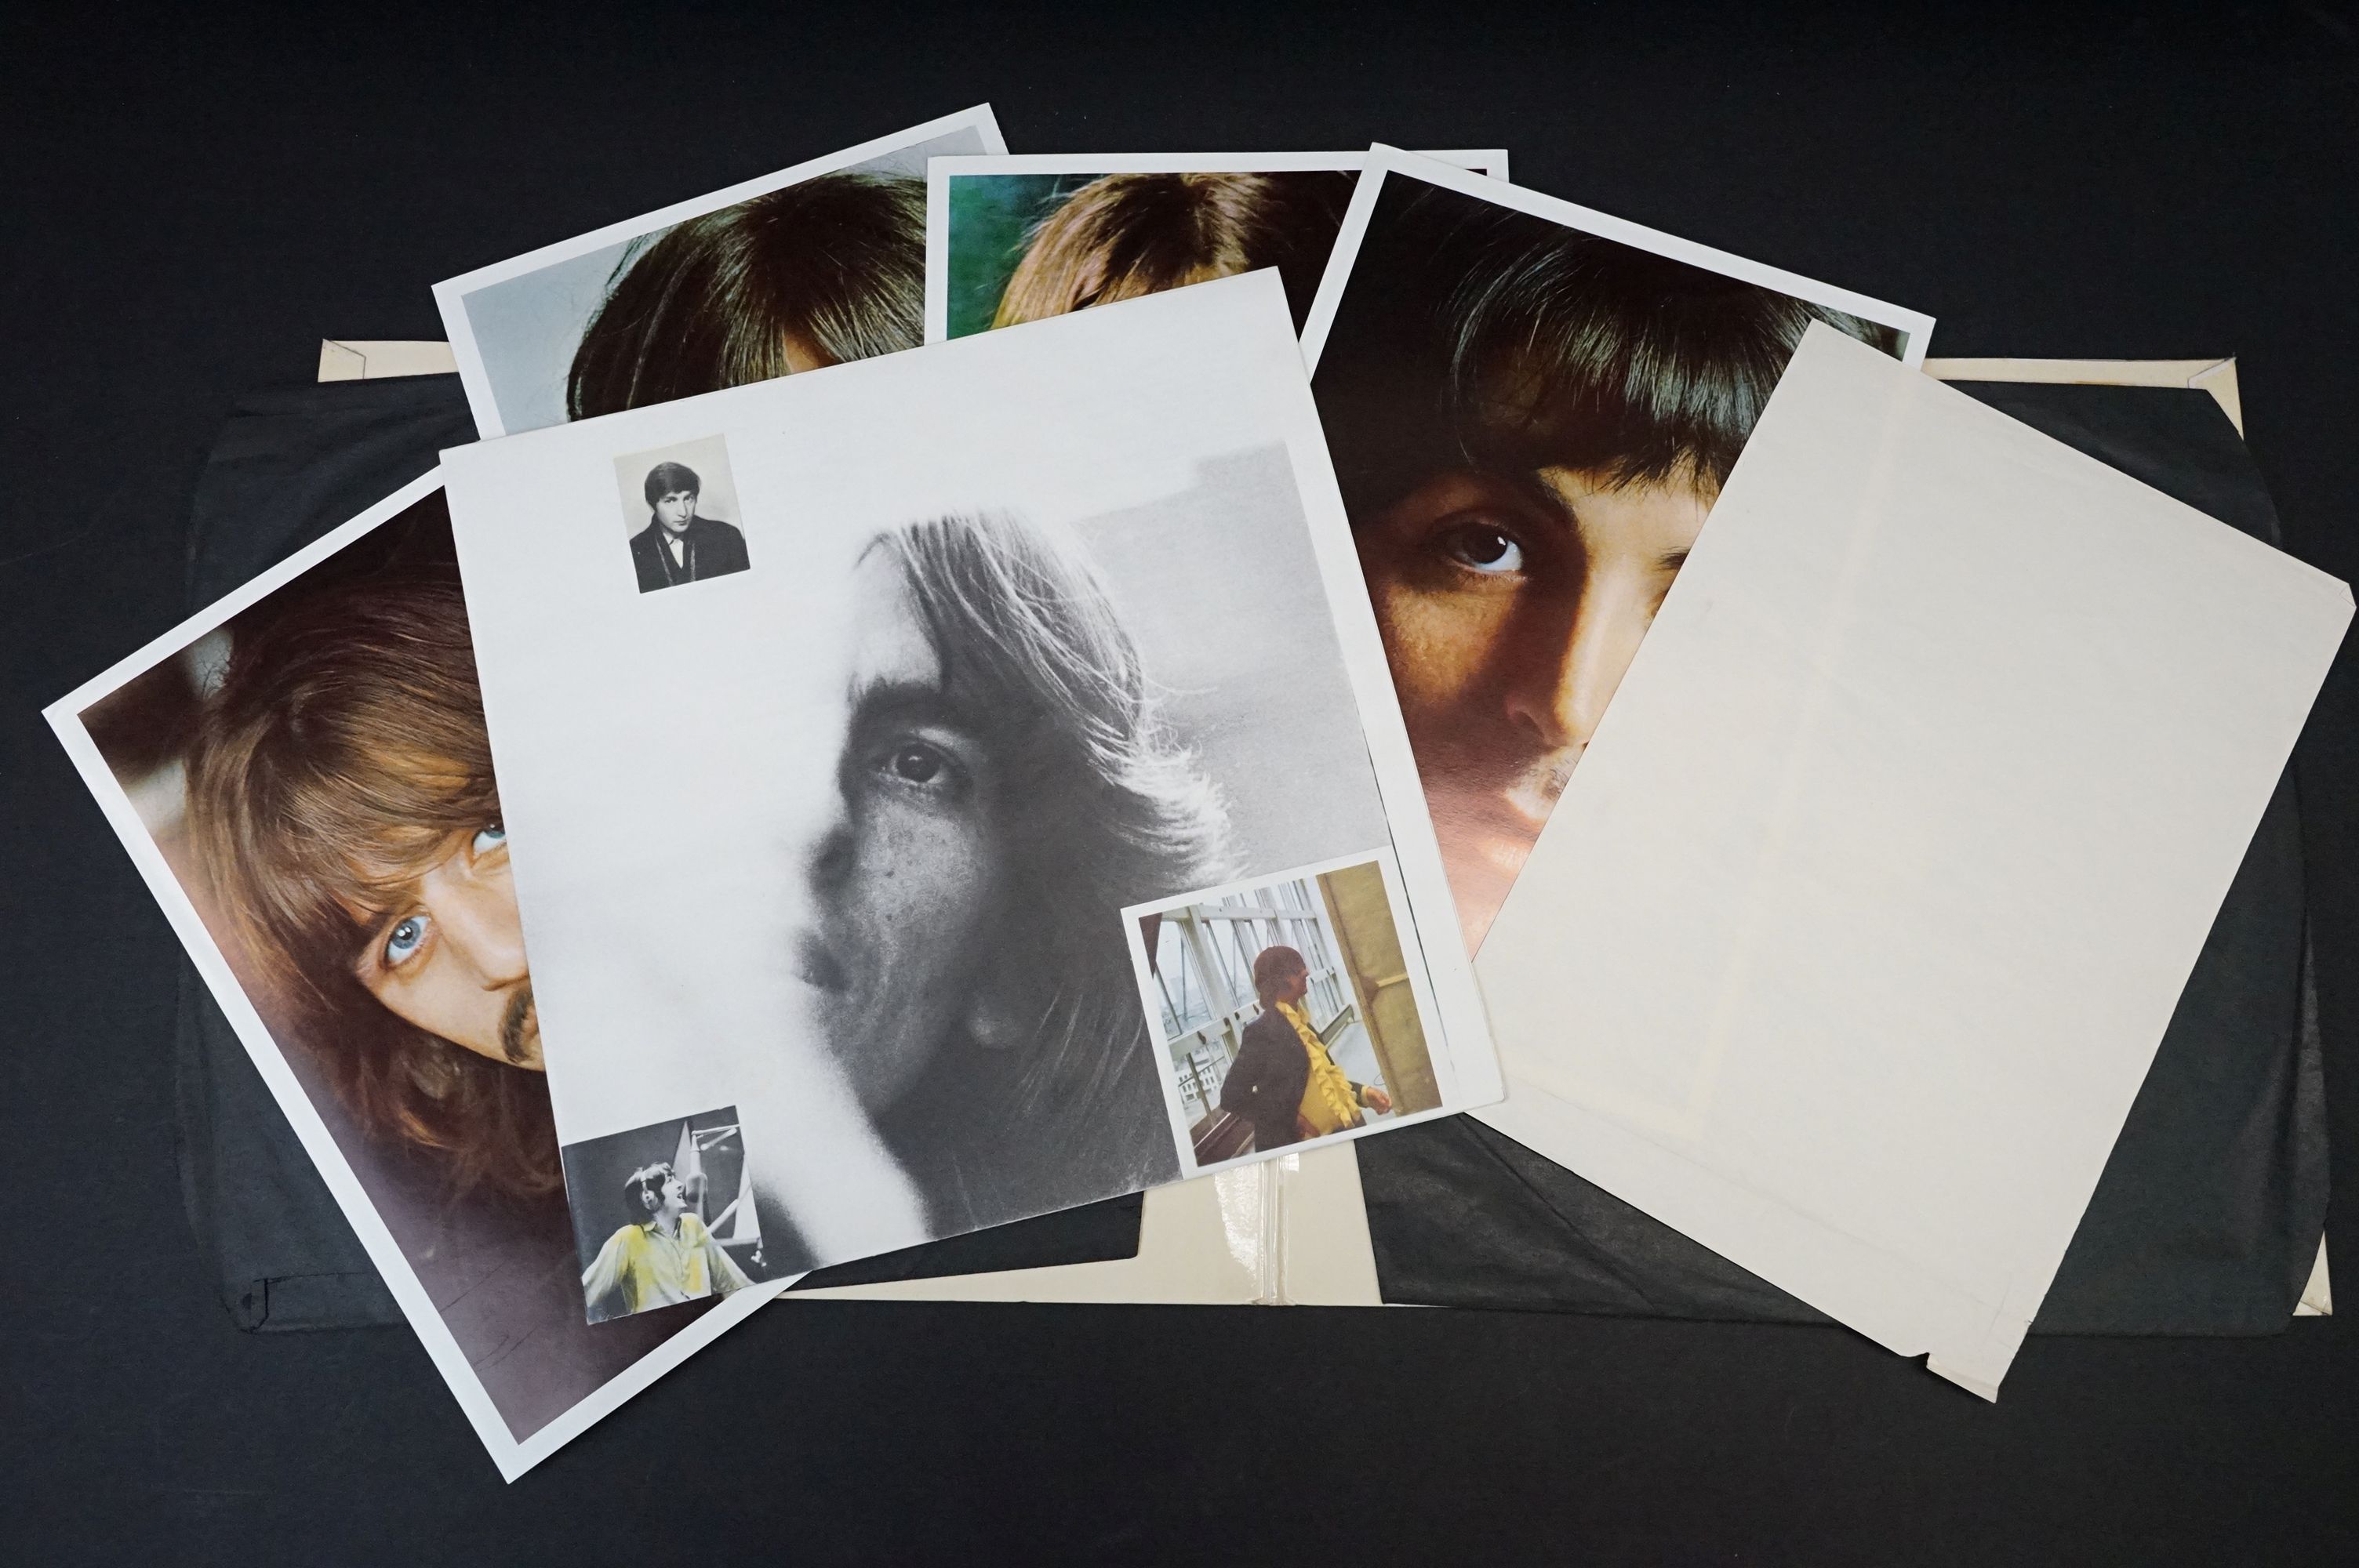 Vinyl - The Beatles White Album PCS 7067/8 low number 0016236. 4 photos and poster present. Sleeve - Image 5 of 9